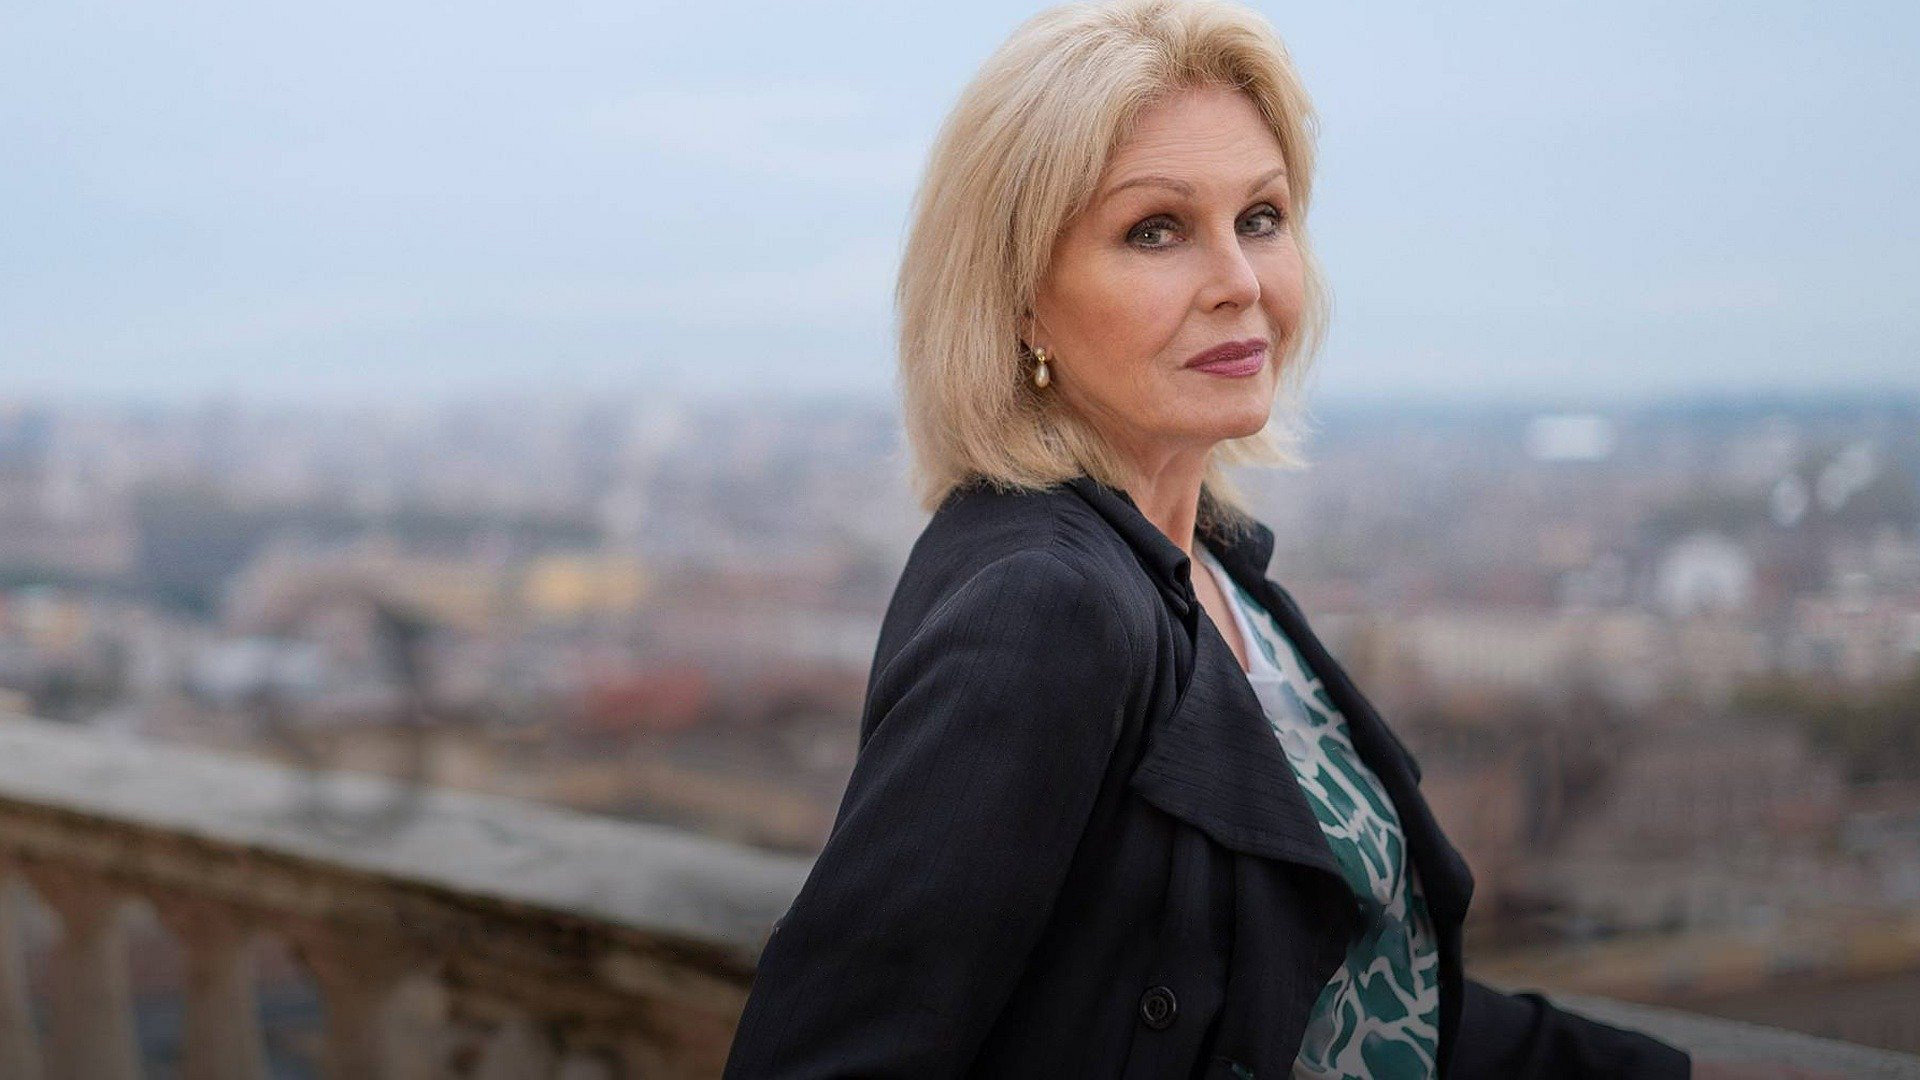 Joanna Lumley's Great Cities of the World